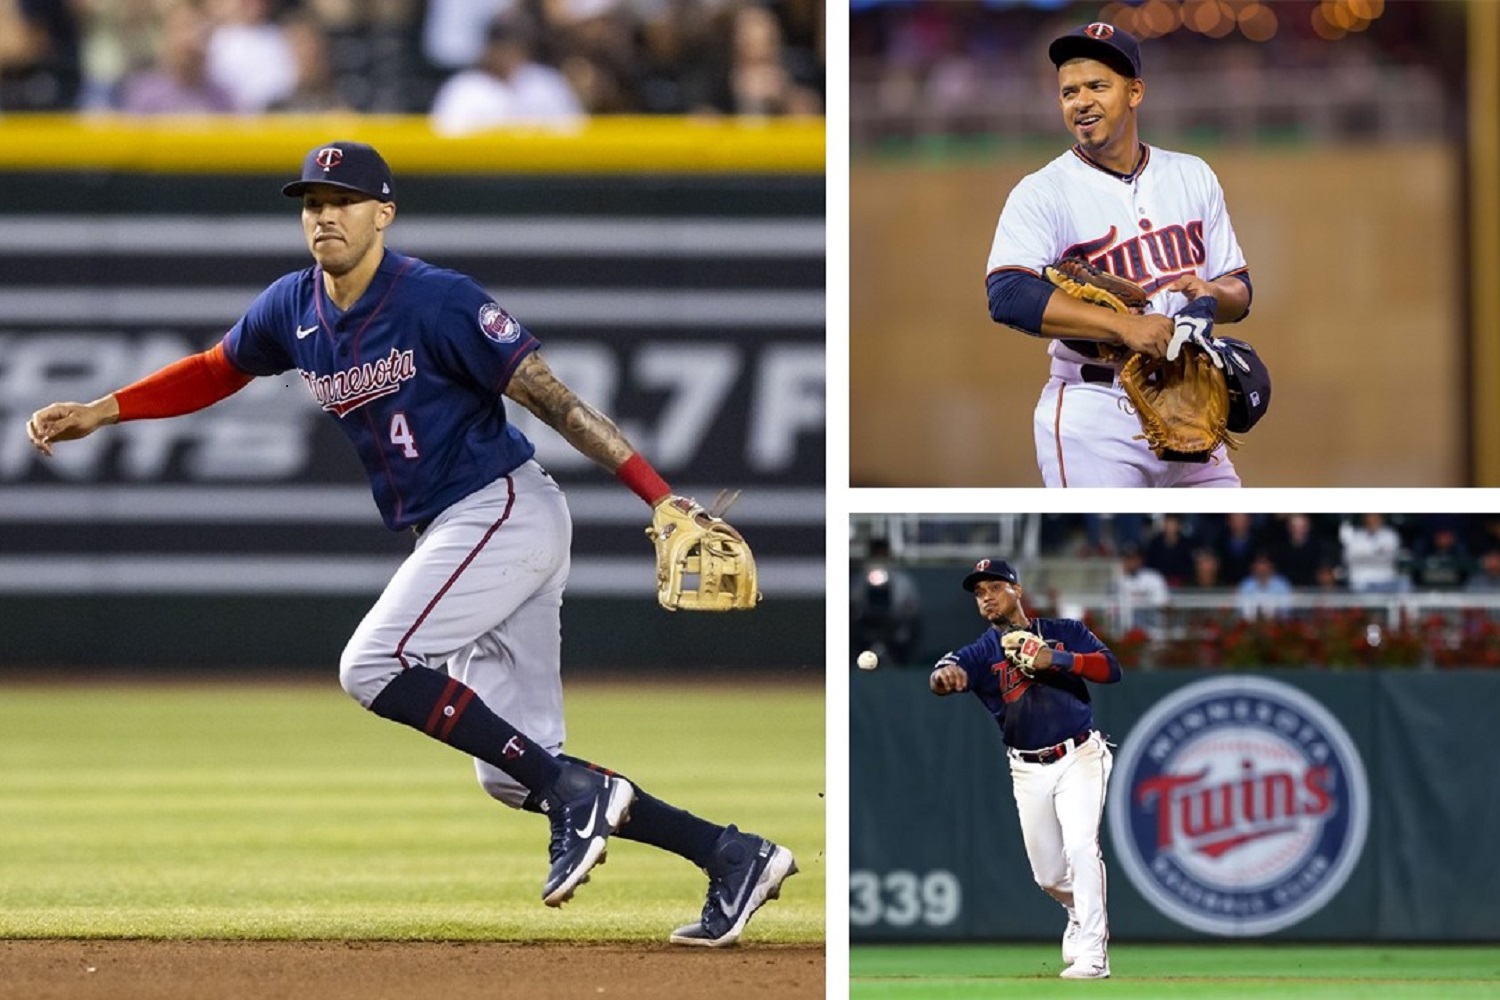 Can the Twins Win With Jose Iglesias? - Twins - Twins Daily